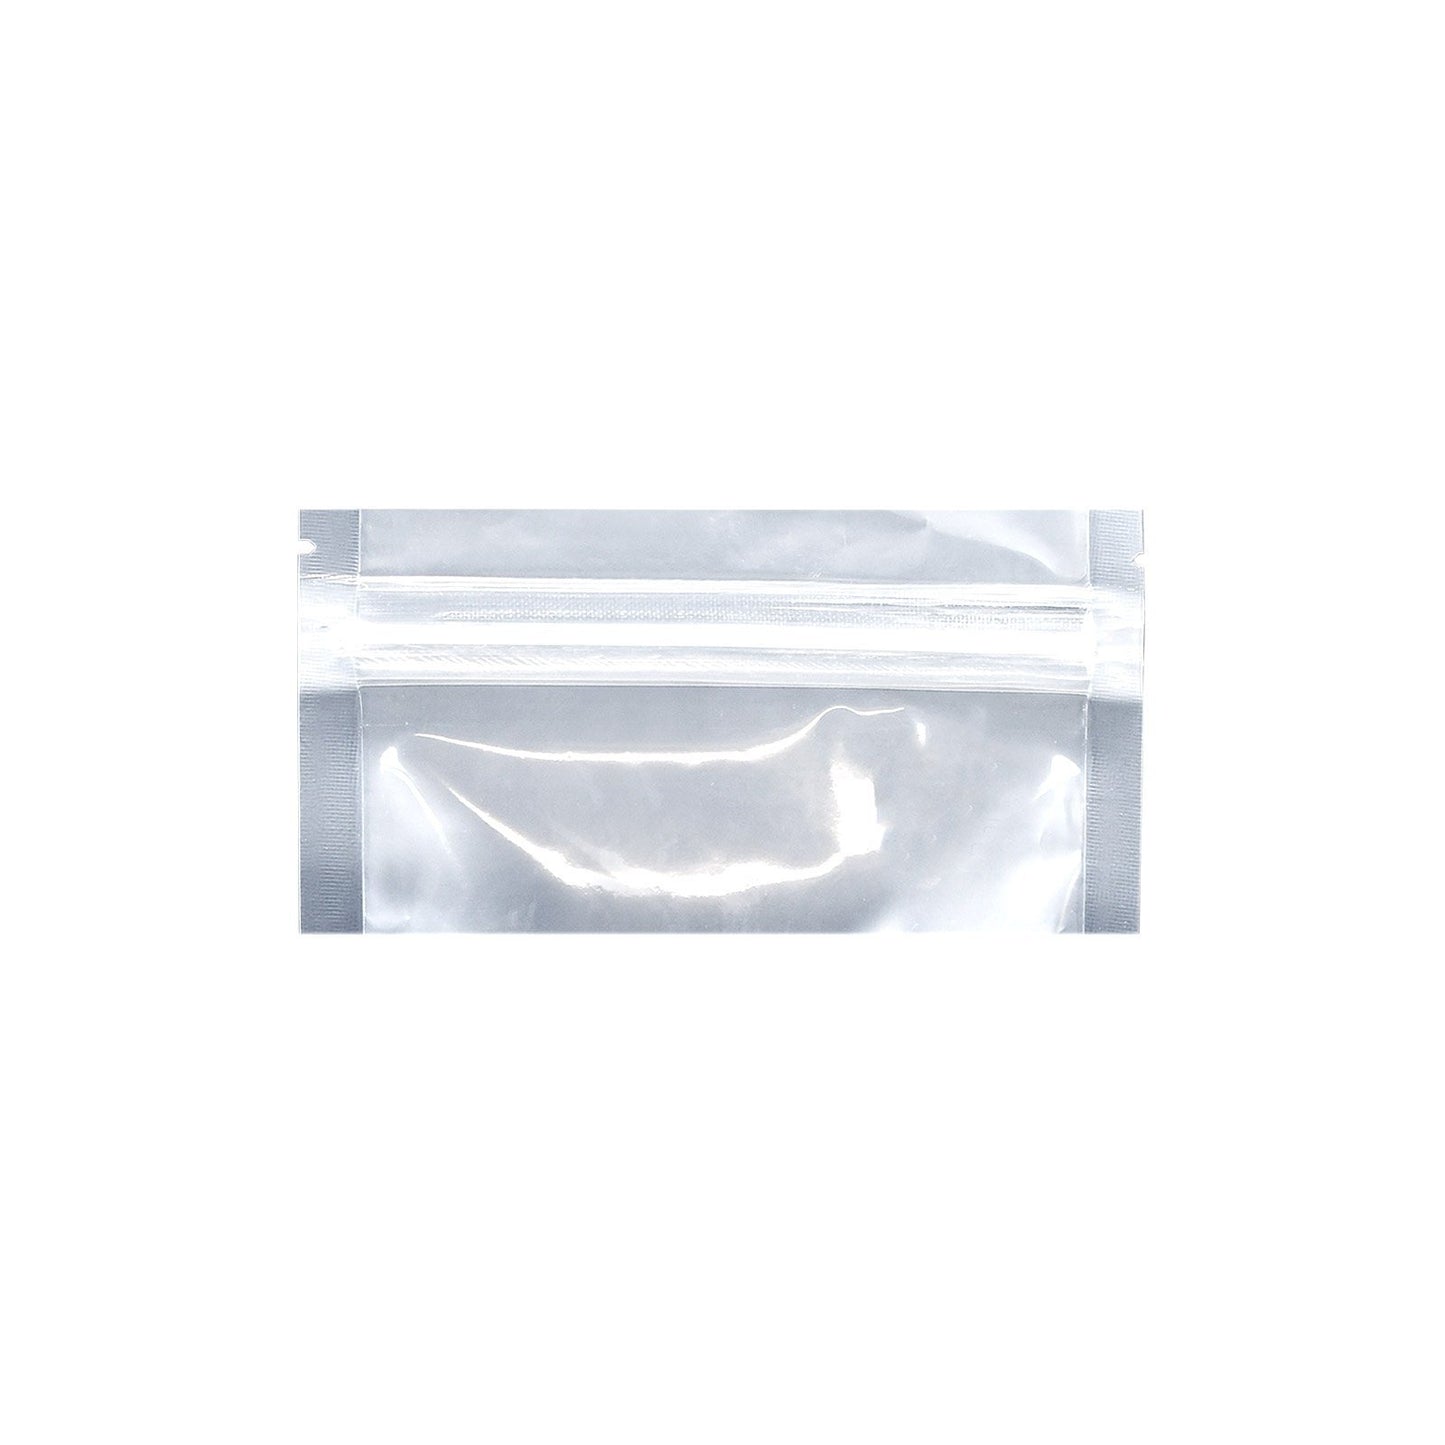 Mylar Bag Tear Notch Clear Black  7" X 2.71" - 1,000 COUNT  at Flower Power Packages